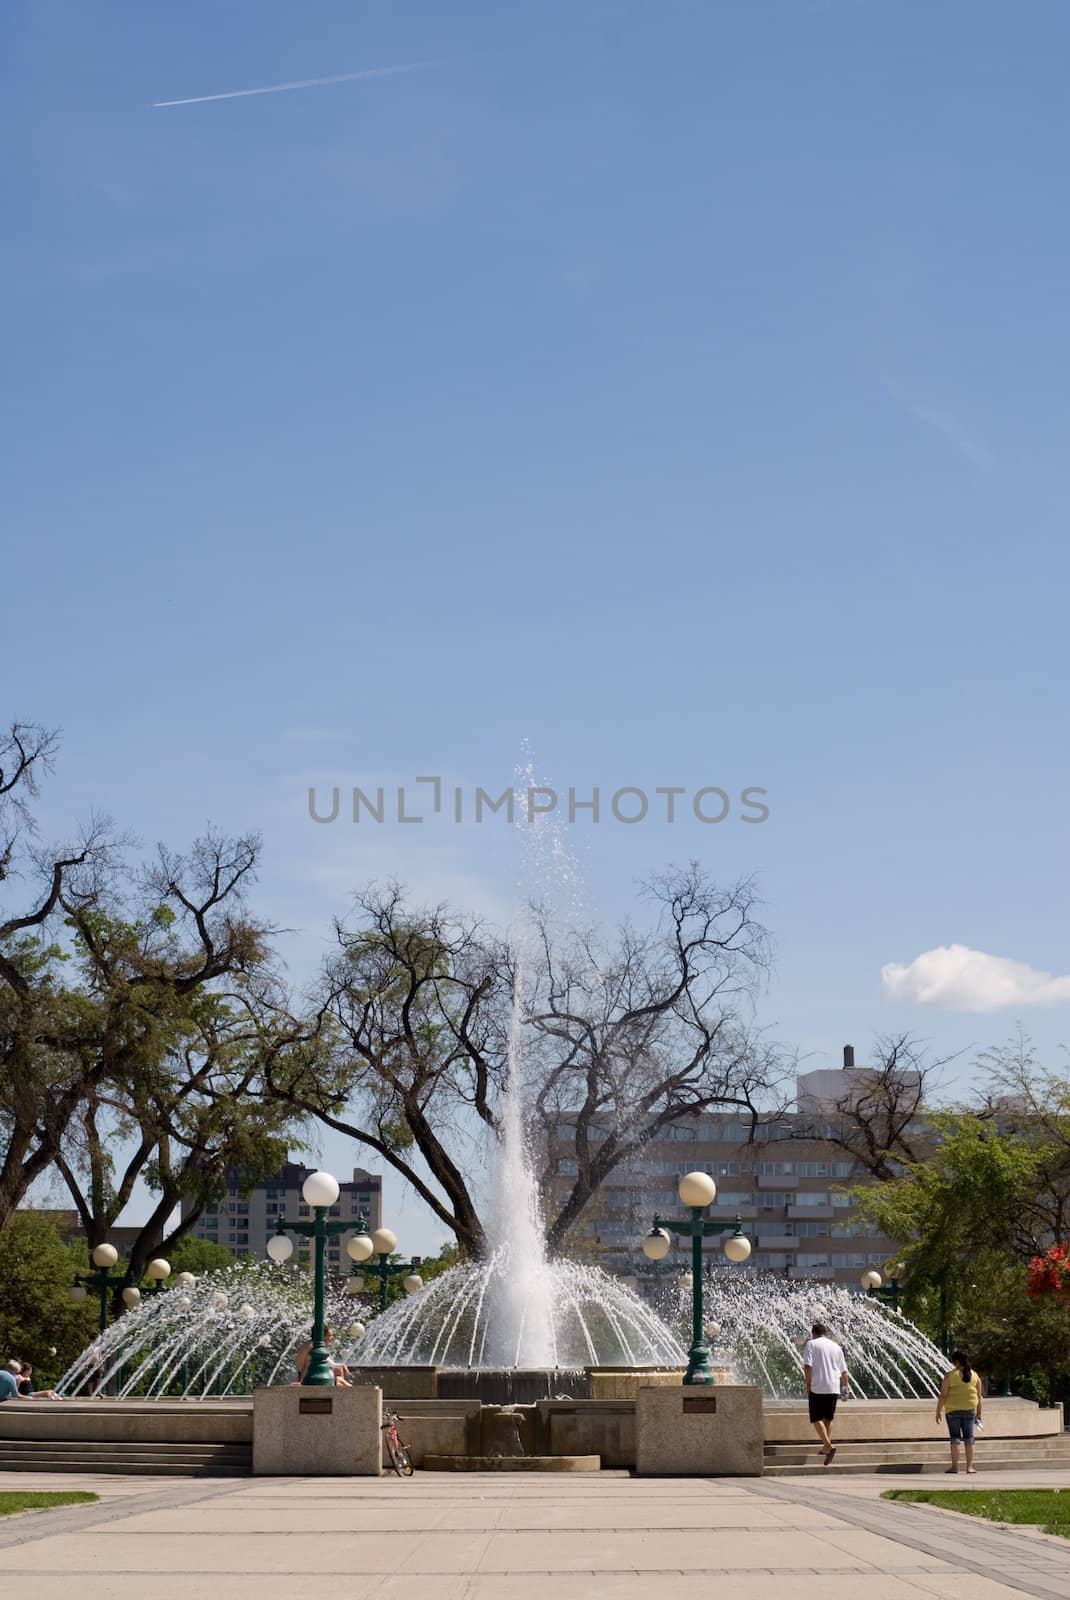 A large water fountain shot during the day, with additional space for the text in the sky